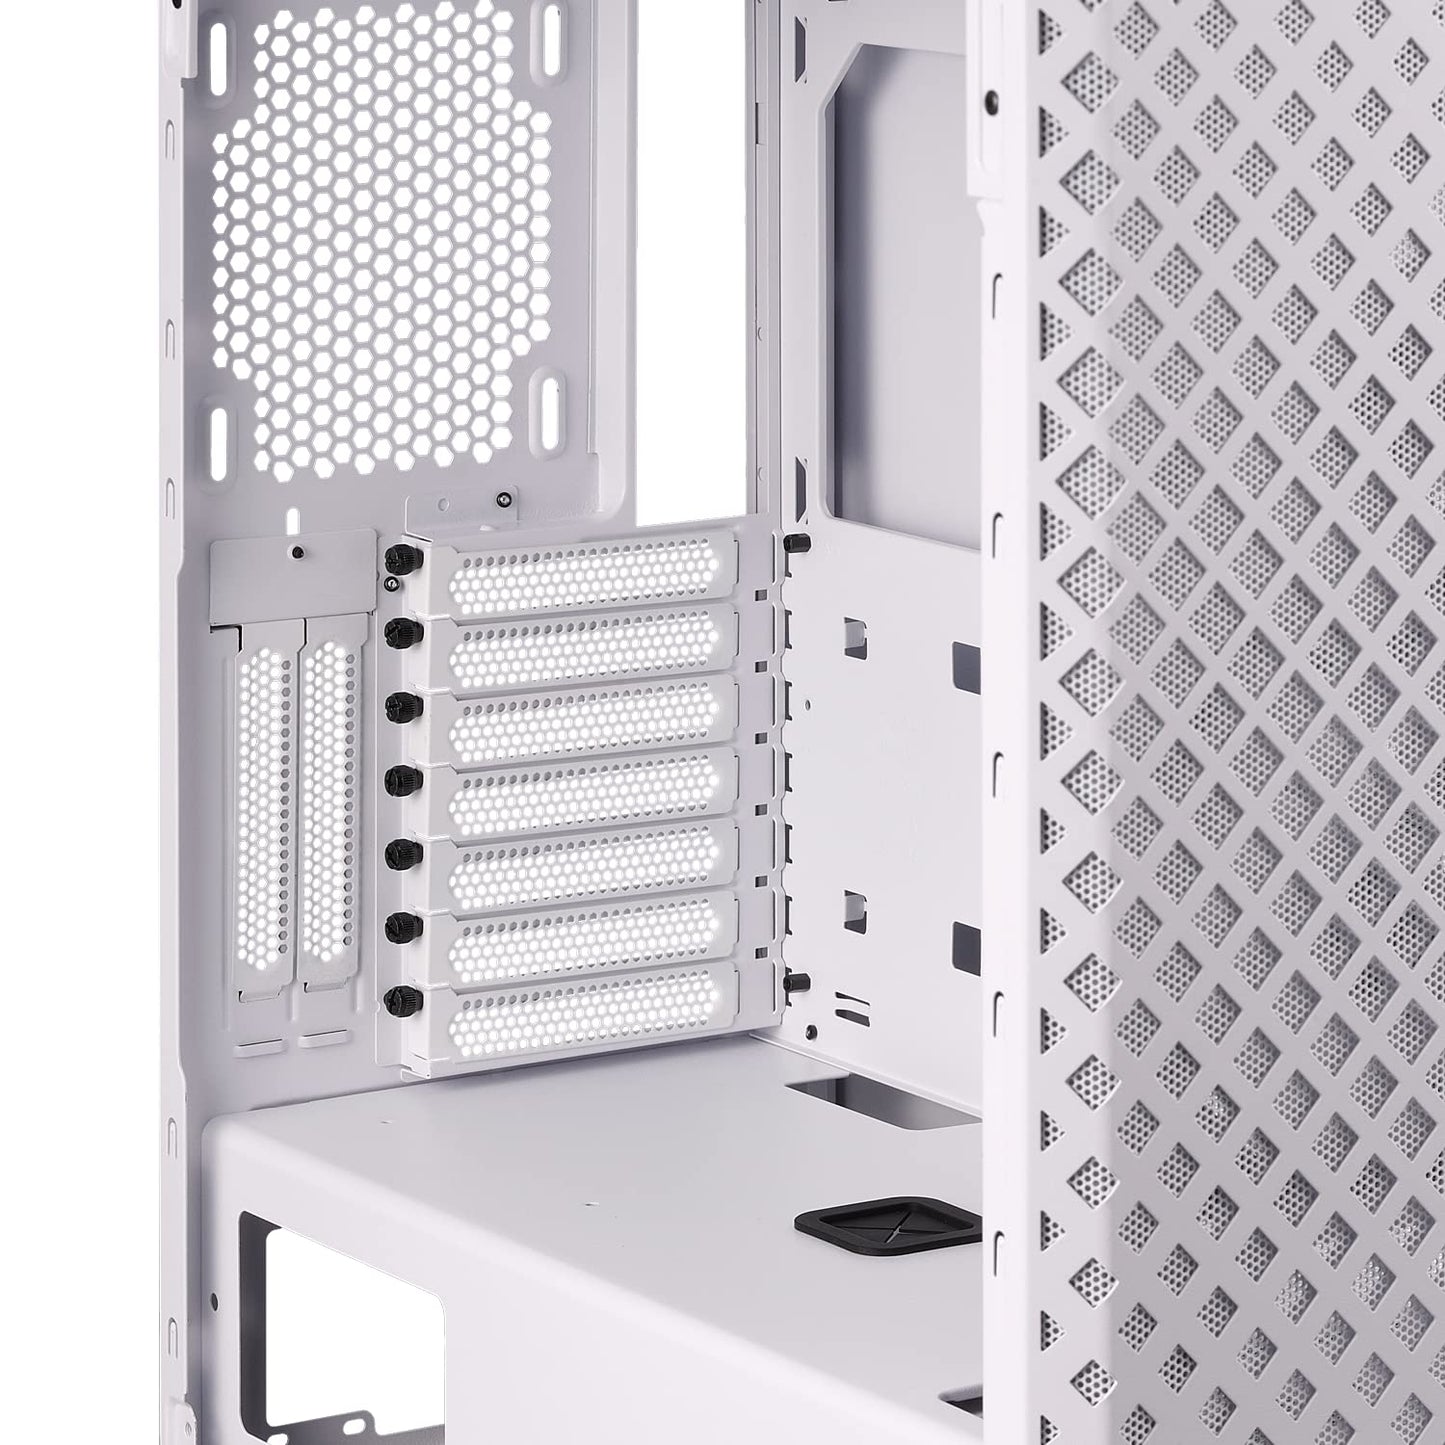 XPG Defender Pro Mid-Tower Chassis E-ATX with MESH Front Panel computer case